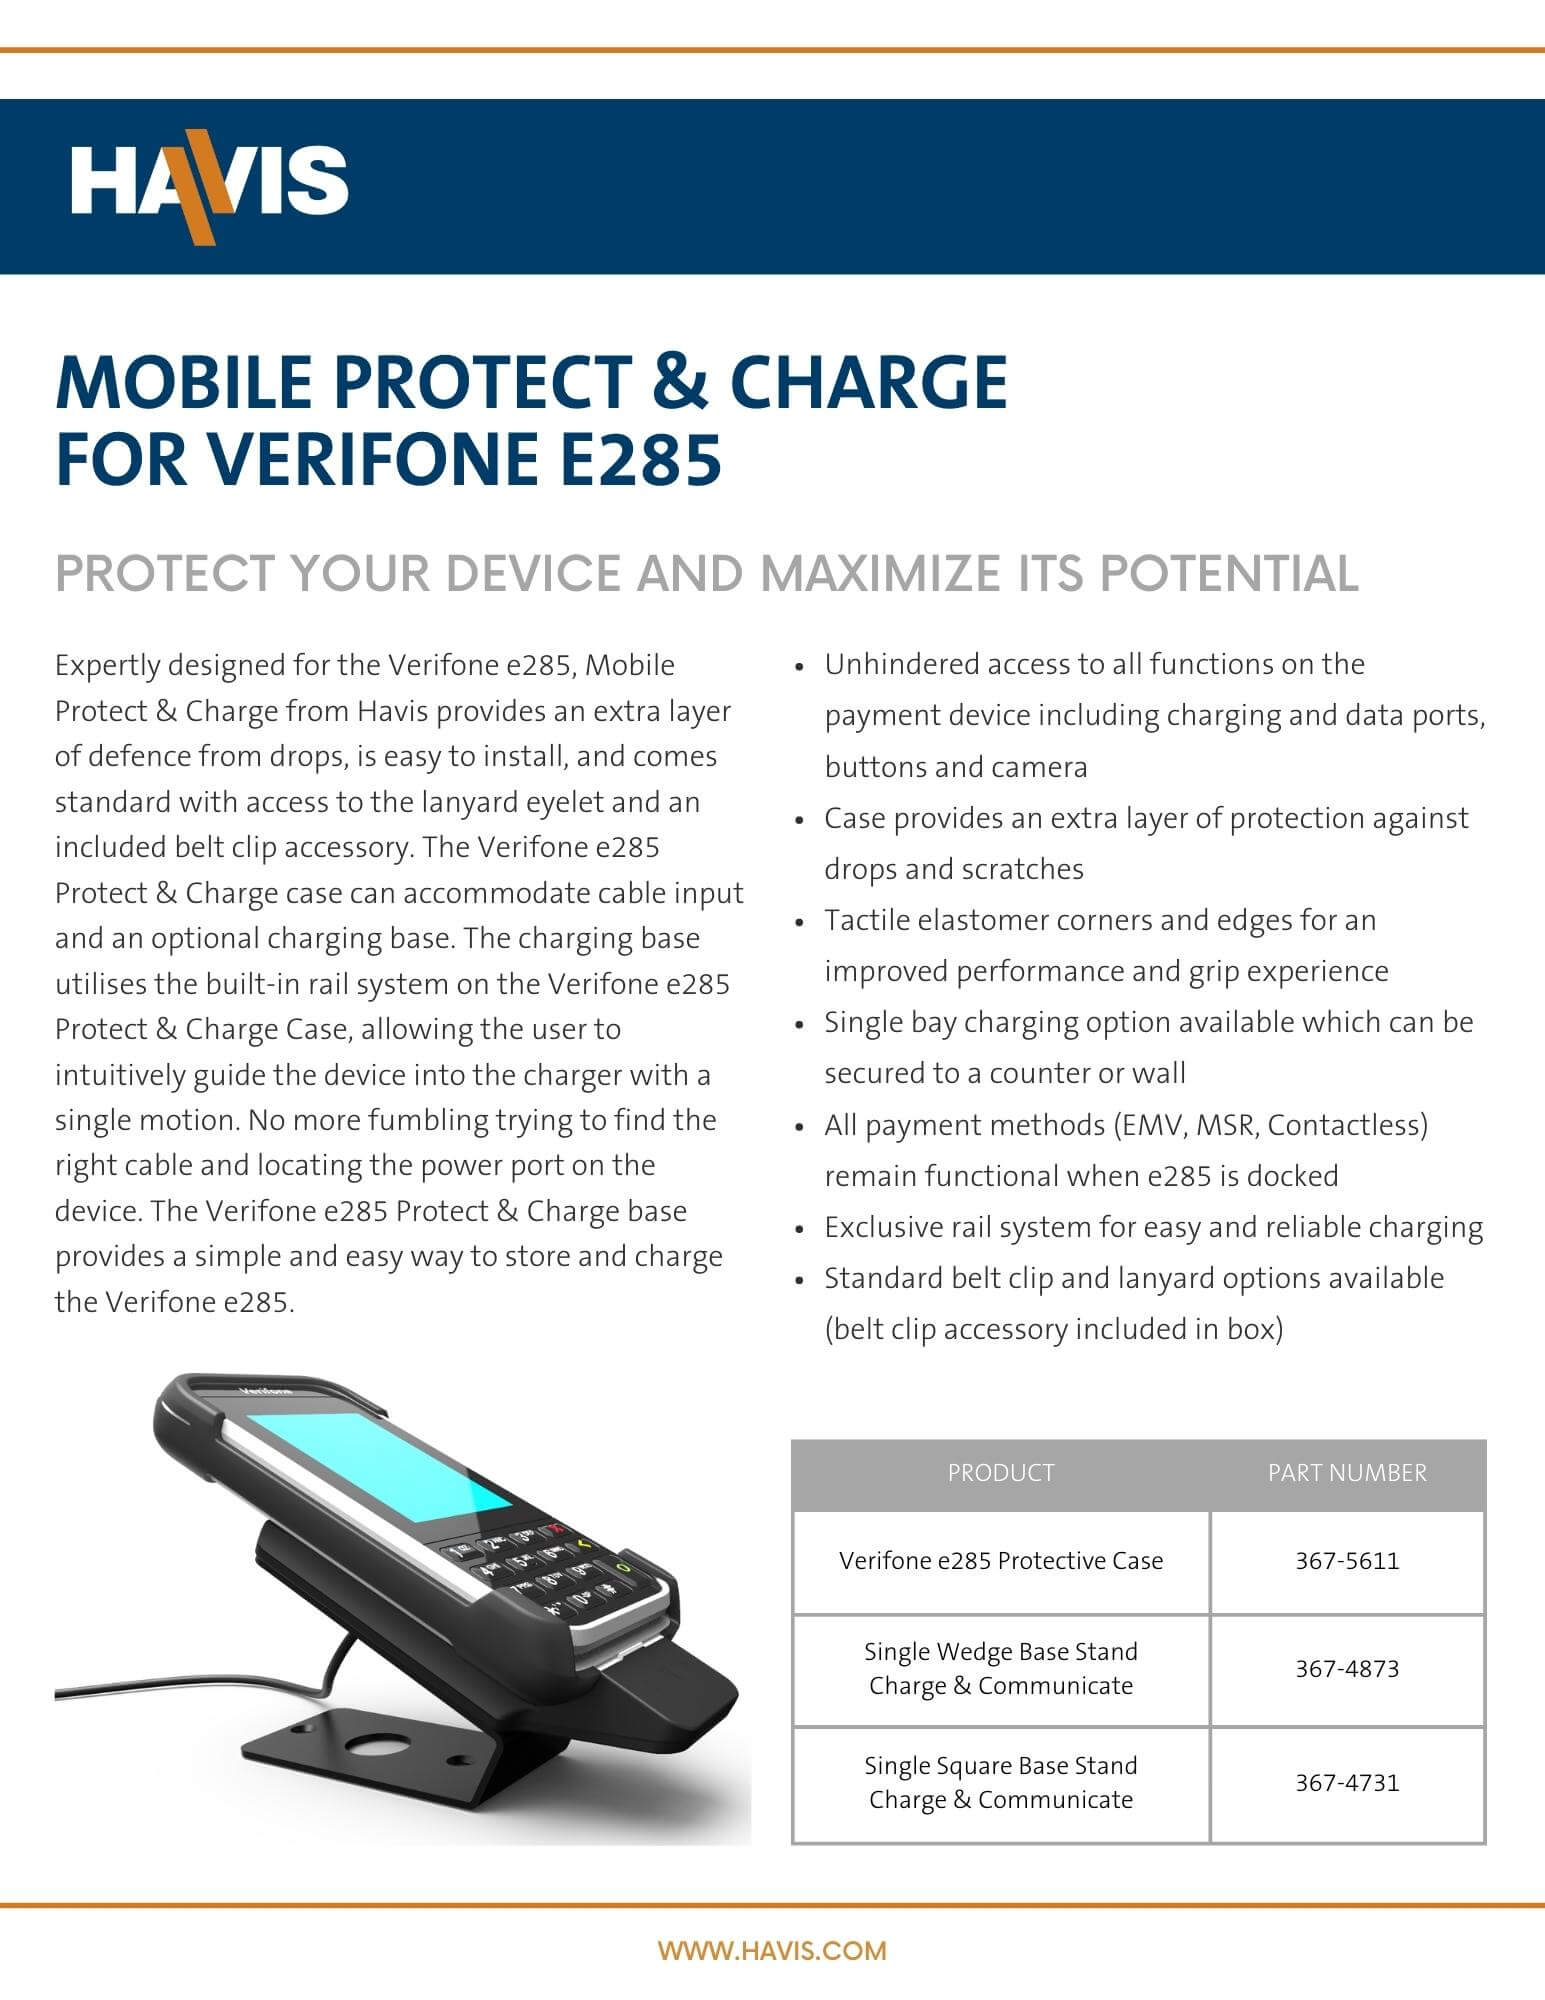 Mobile Protect & Charge for Verifone e285 - Datasheet 